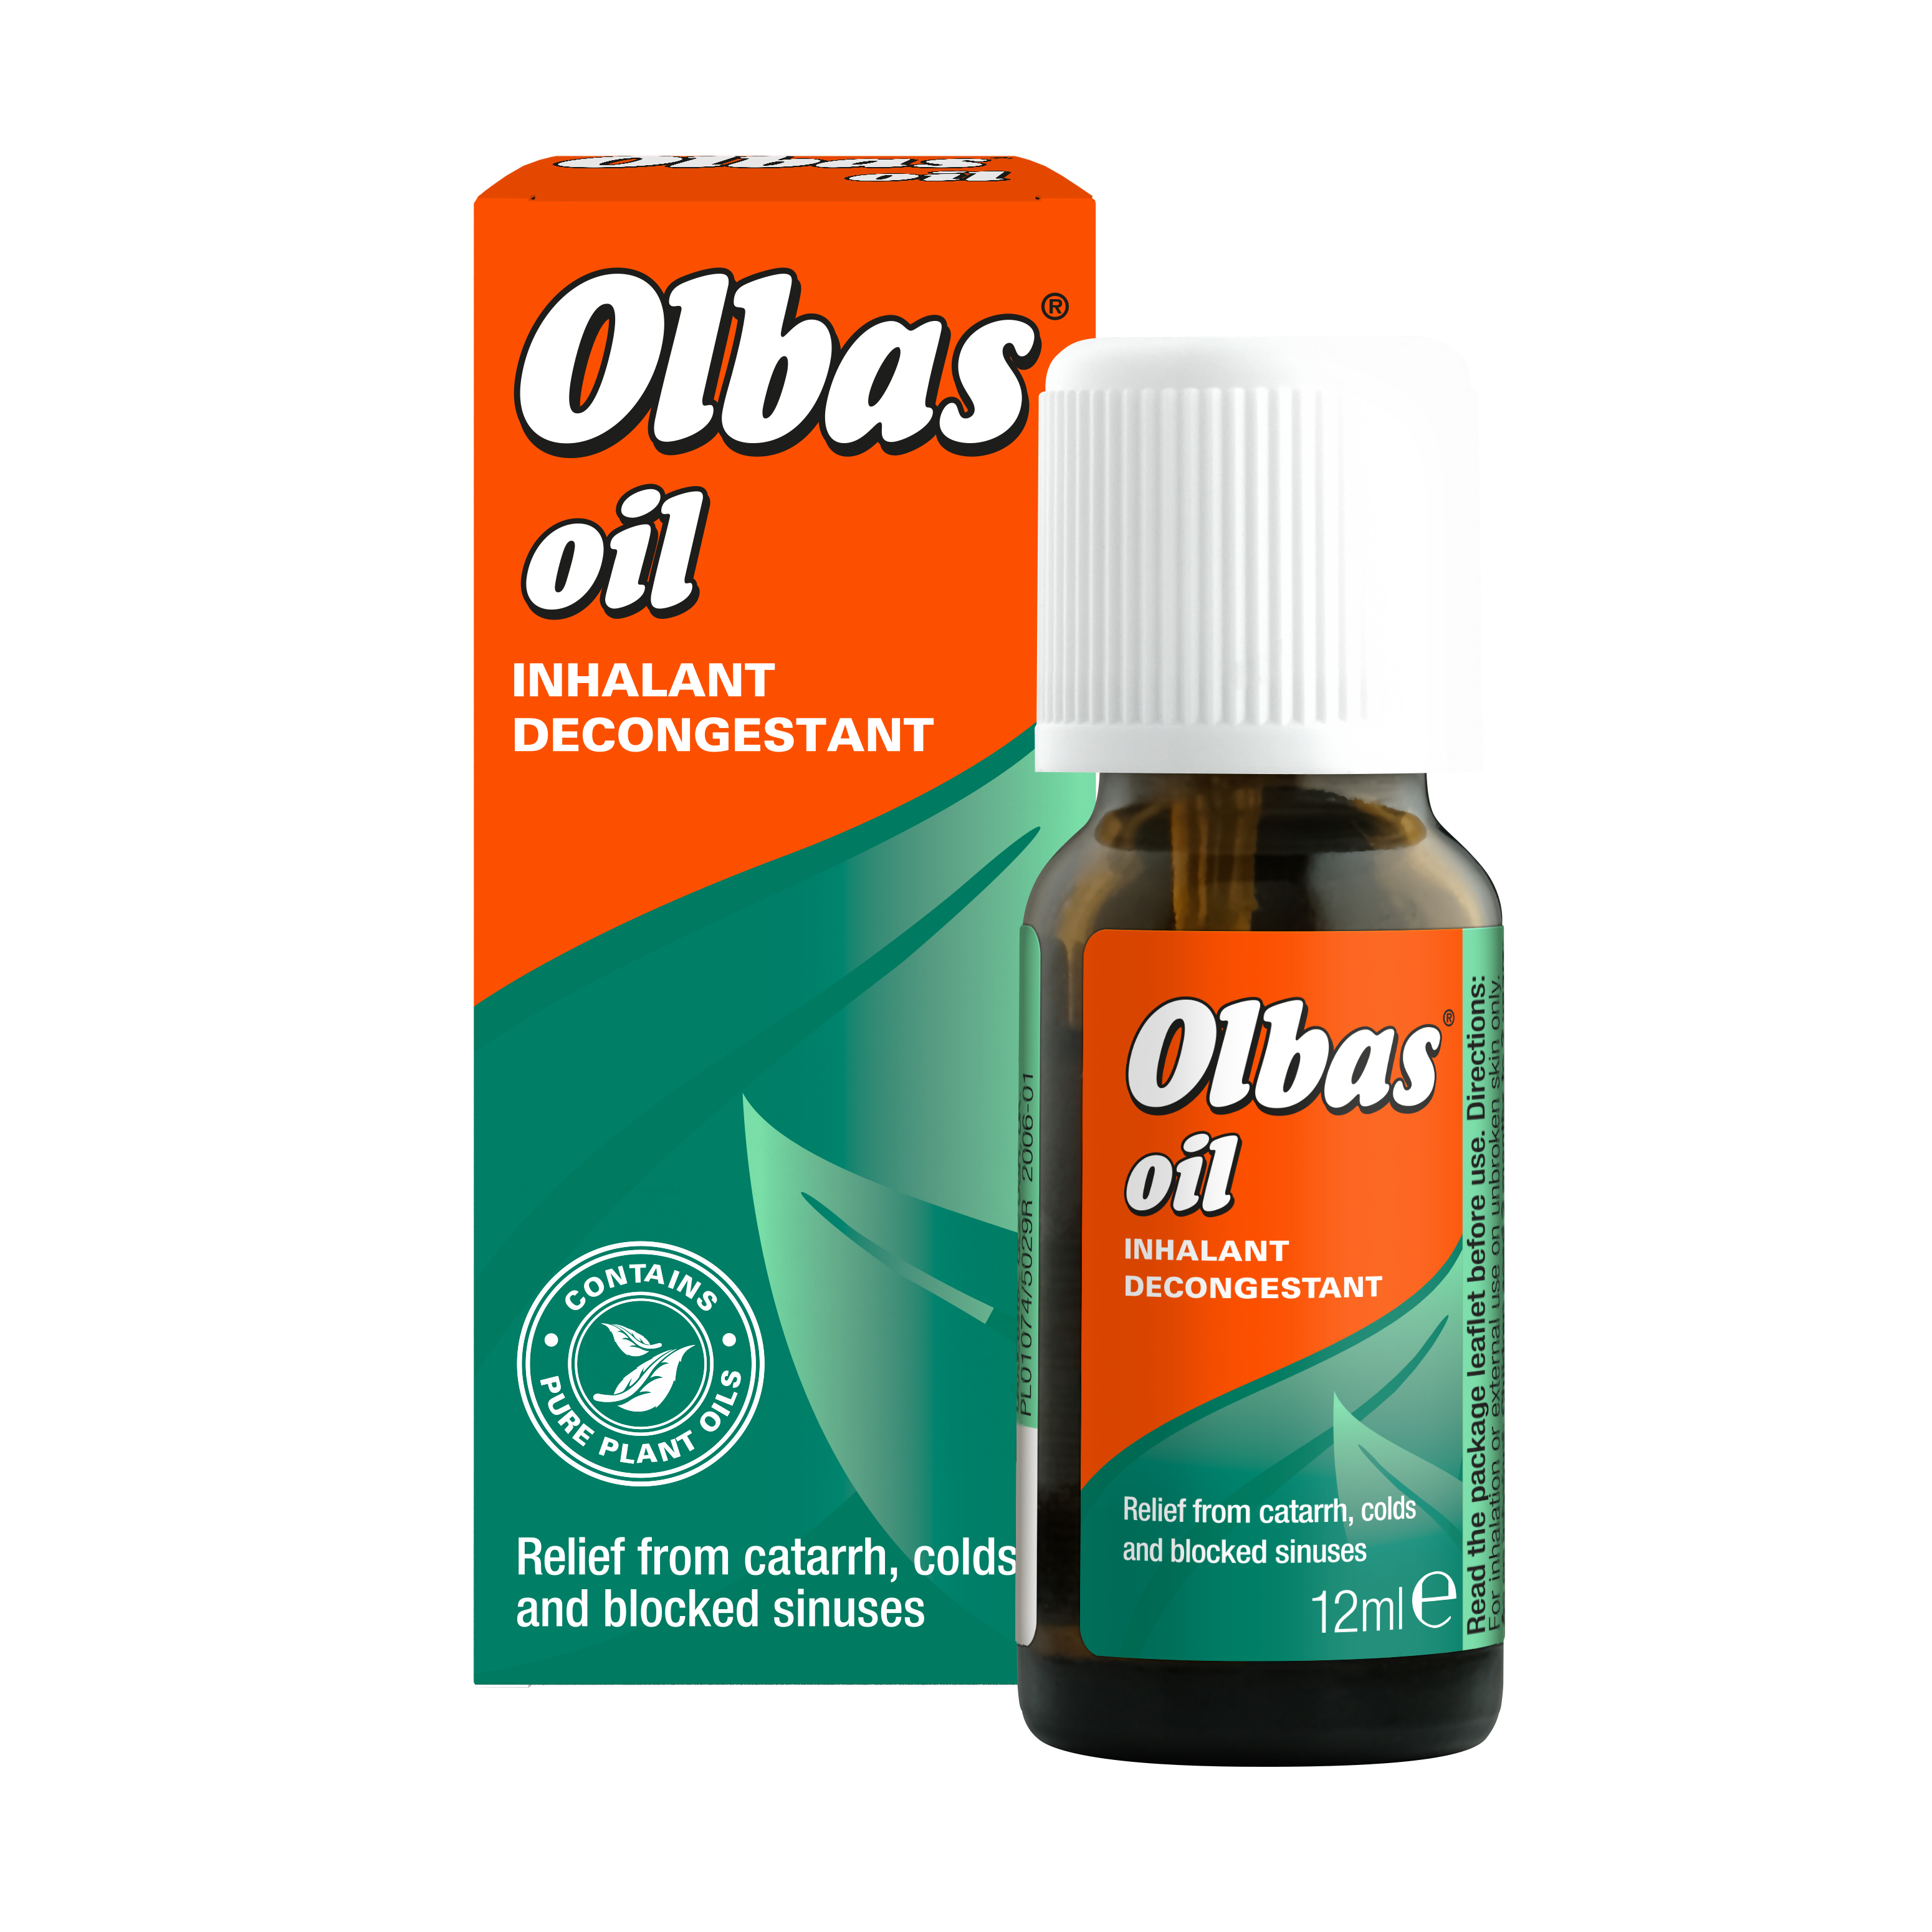 olbas-oil-12ml-bottle-and-box